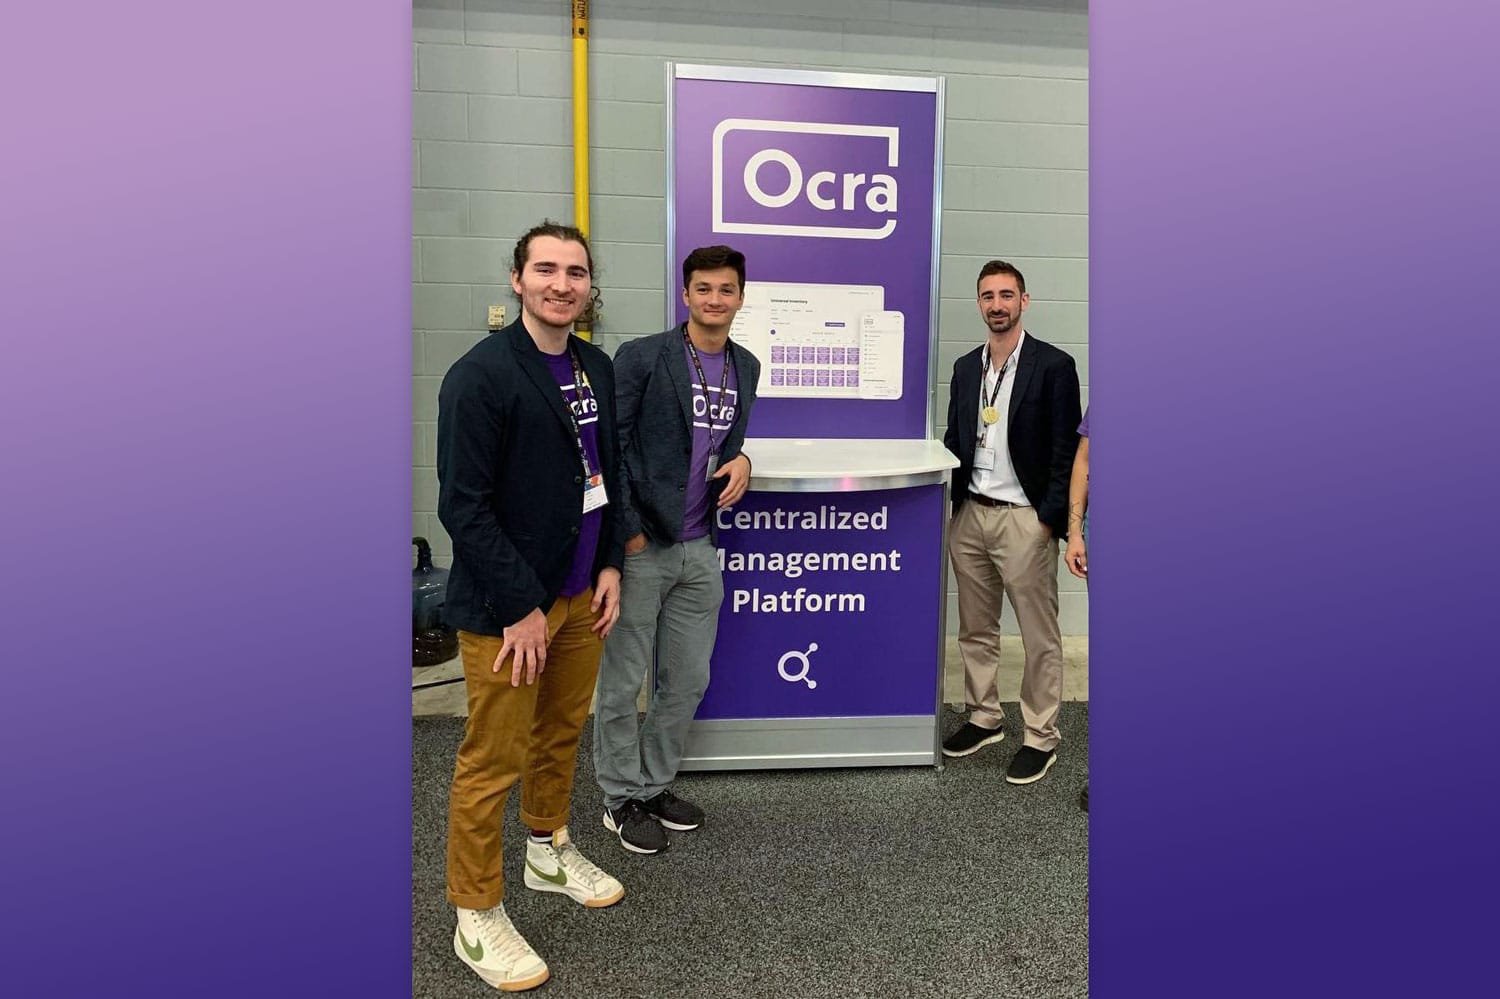 3 men standing a a conference booth next to purple banner with Ocra logo